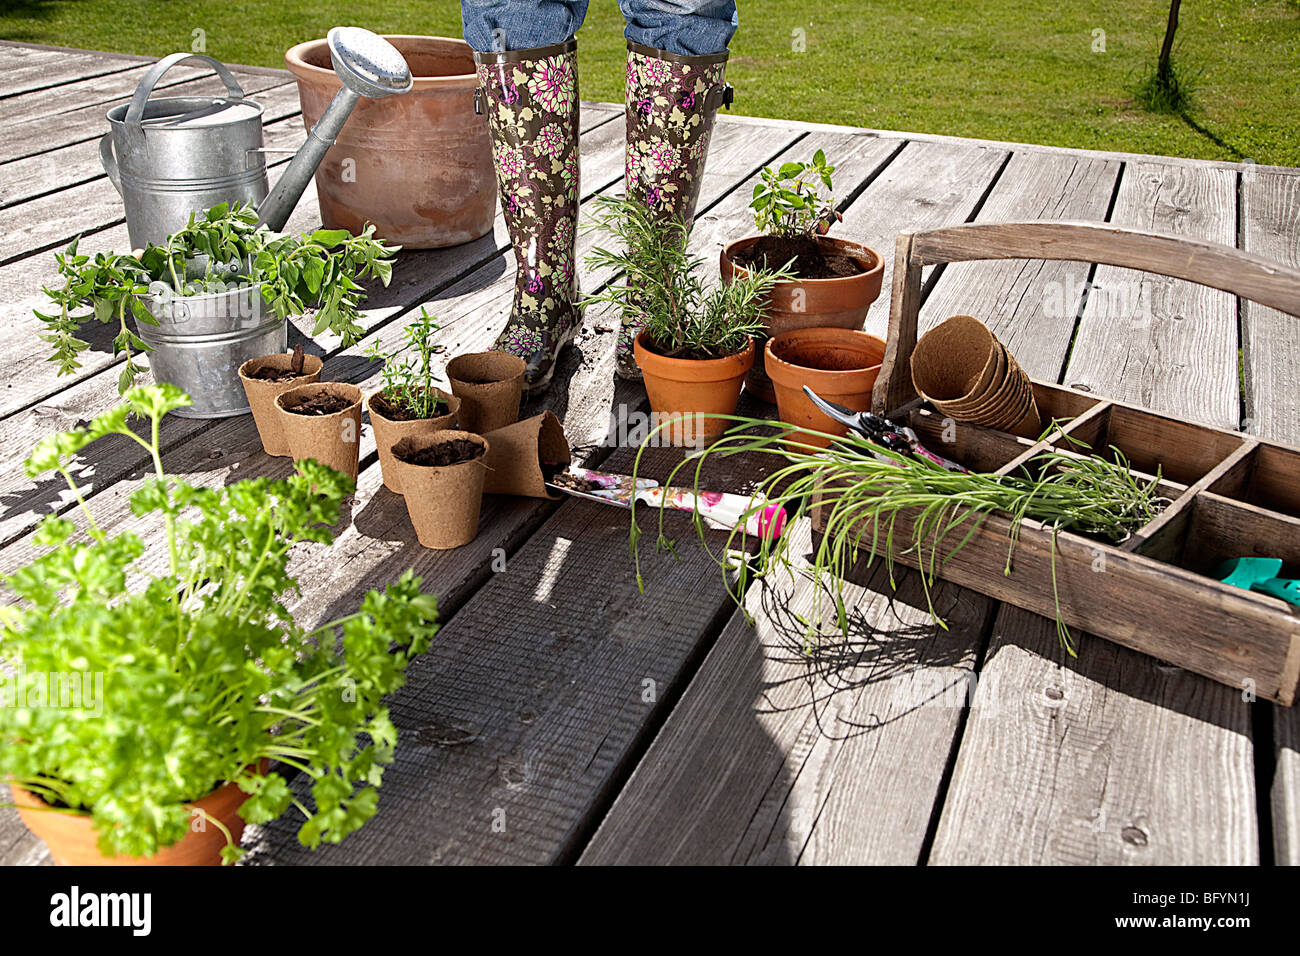 detail of young woman on veranda surrounded by gardening equipment Stock Photo